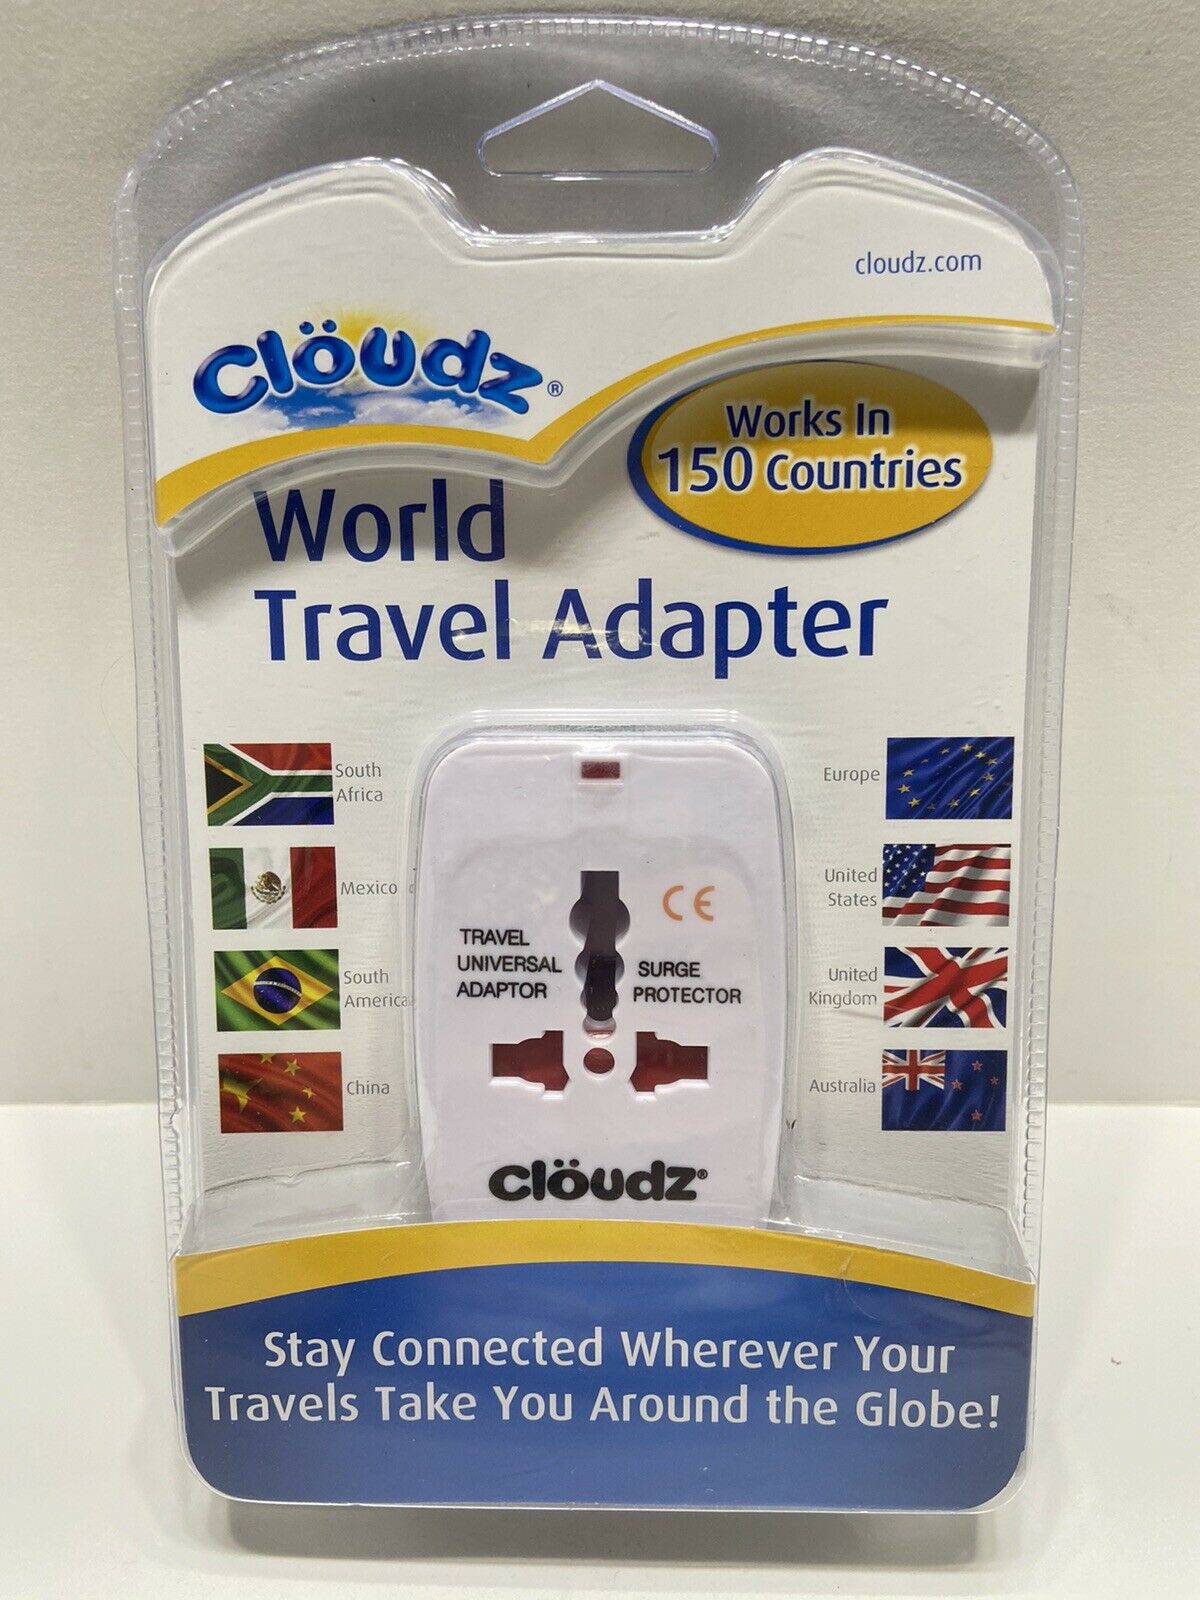 New Cloudz World Travel Adapter Electric Conversion Worldwide 150 Countries